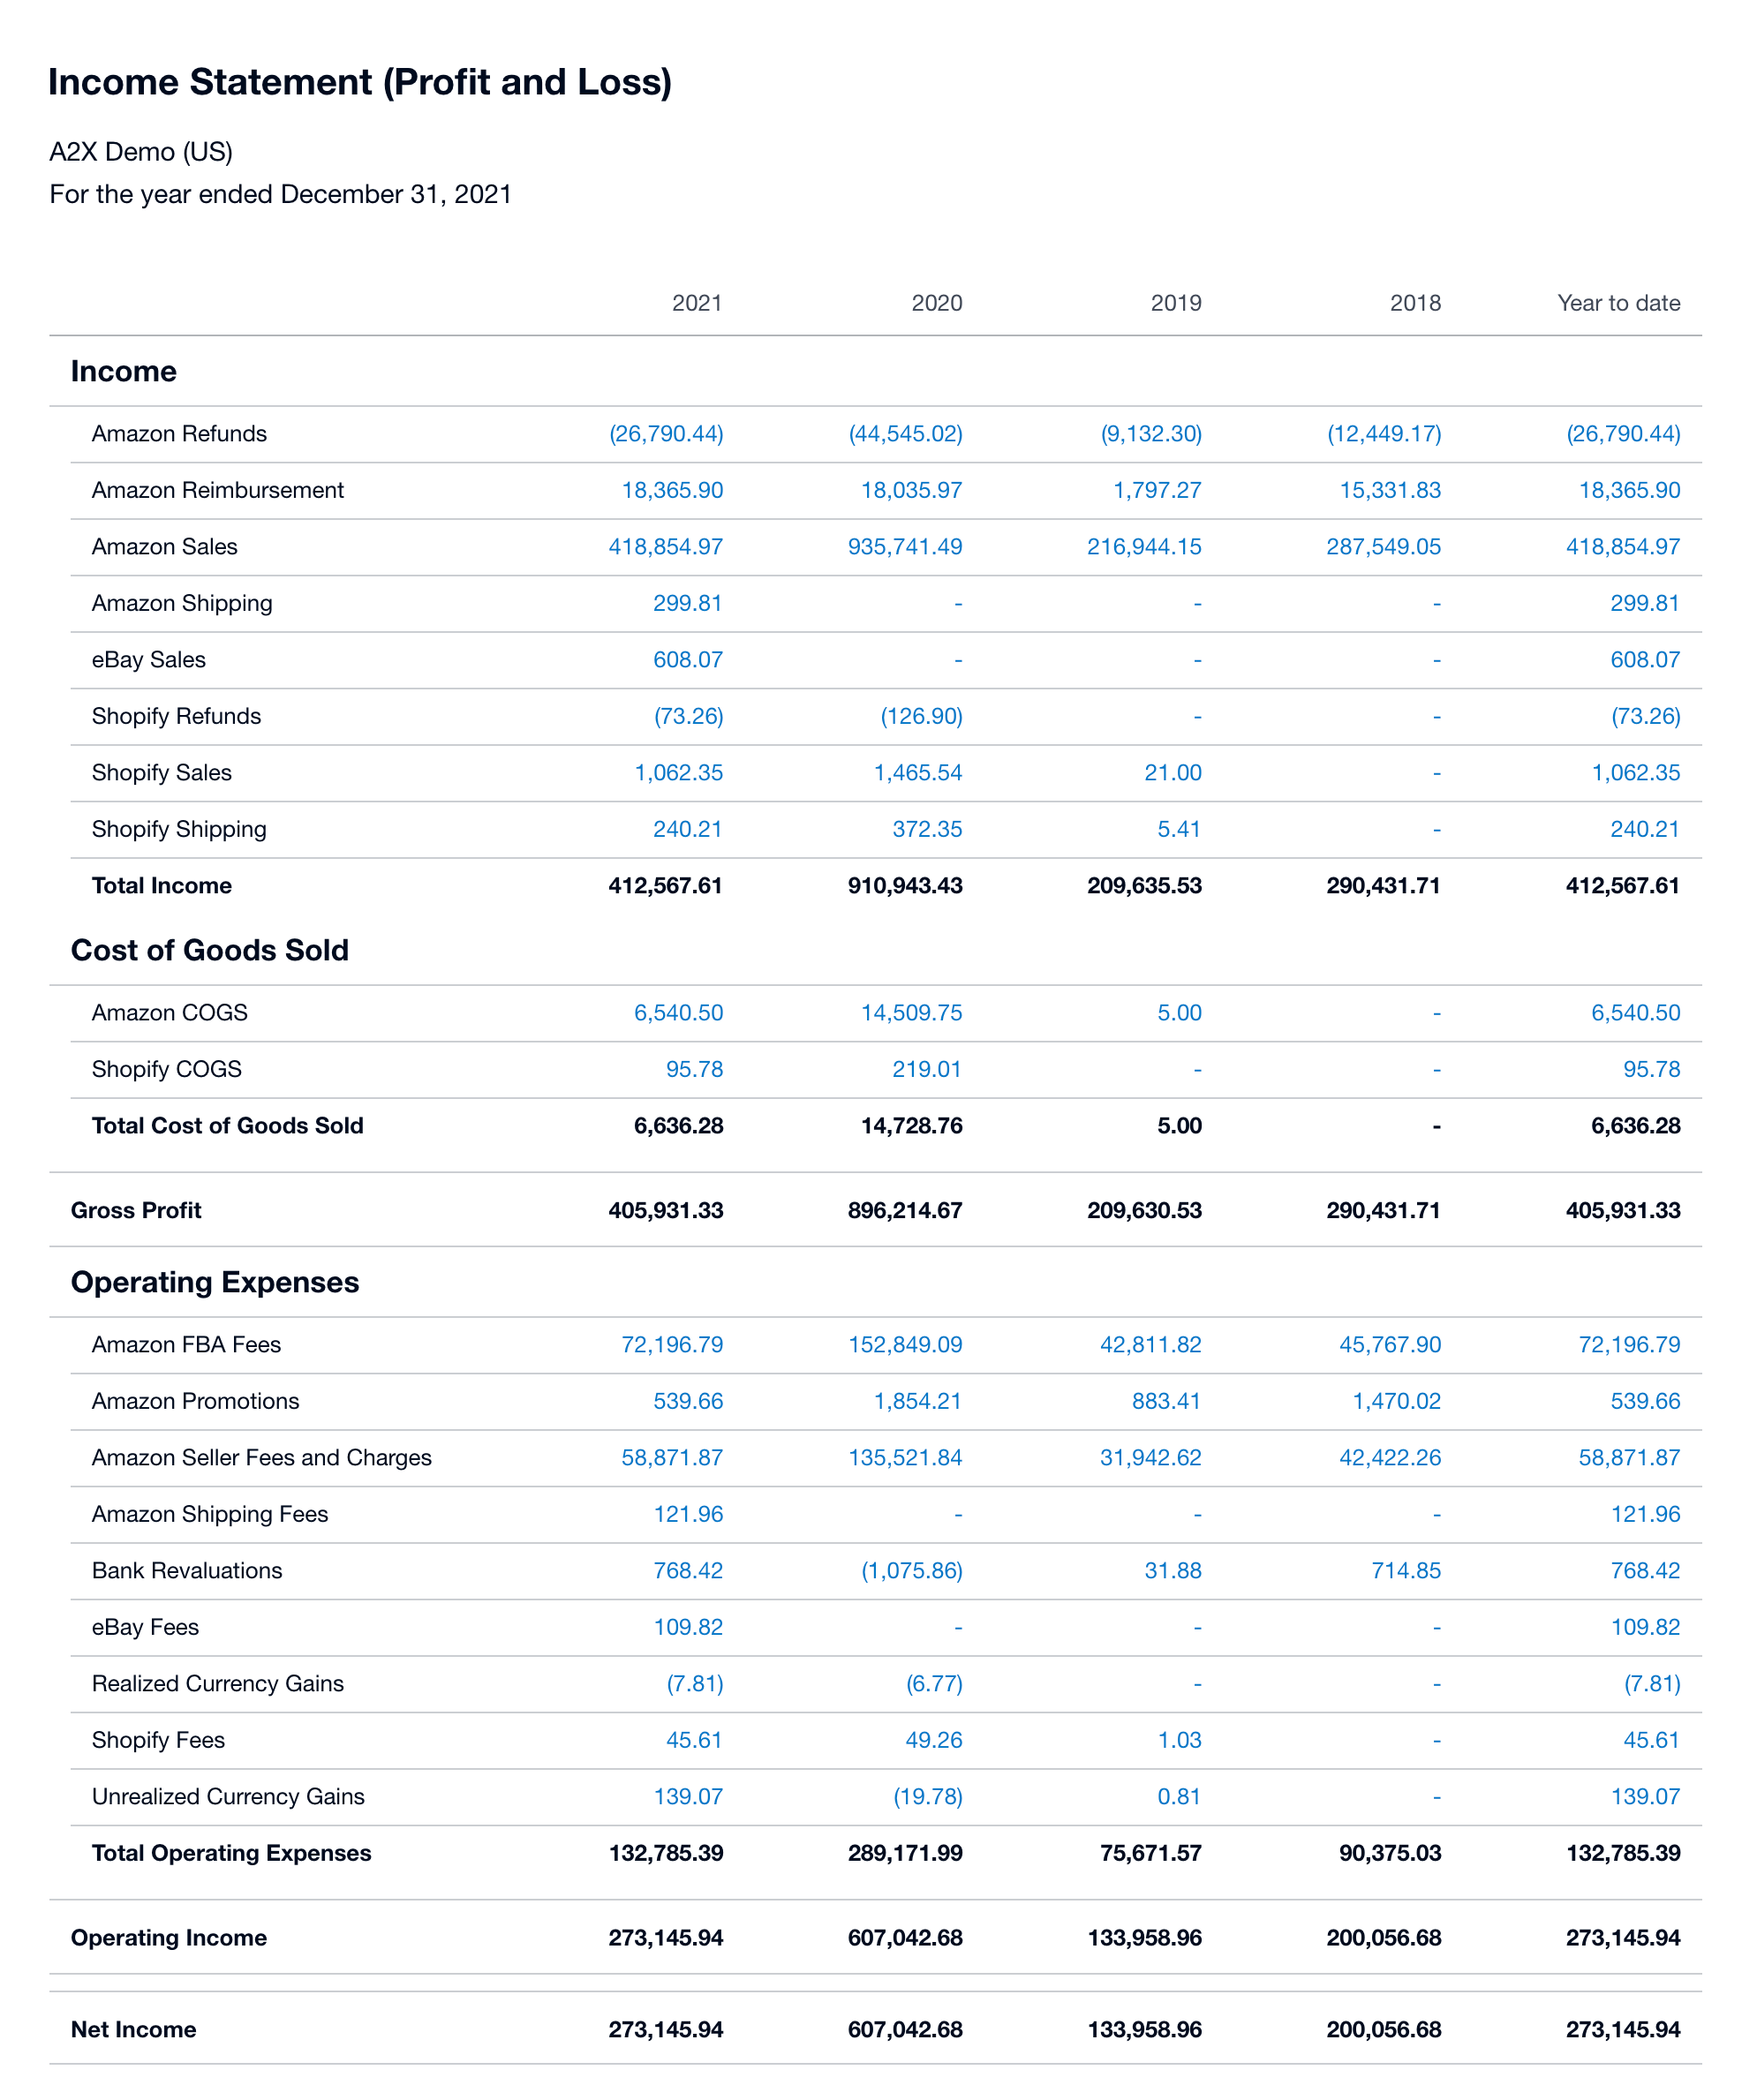 A Profit & Loss statement in Xero for a multi-channel seller